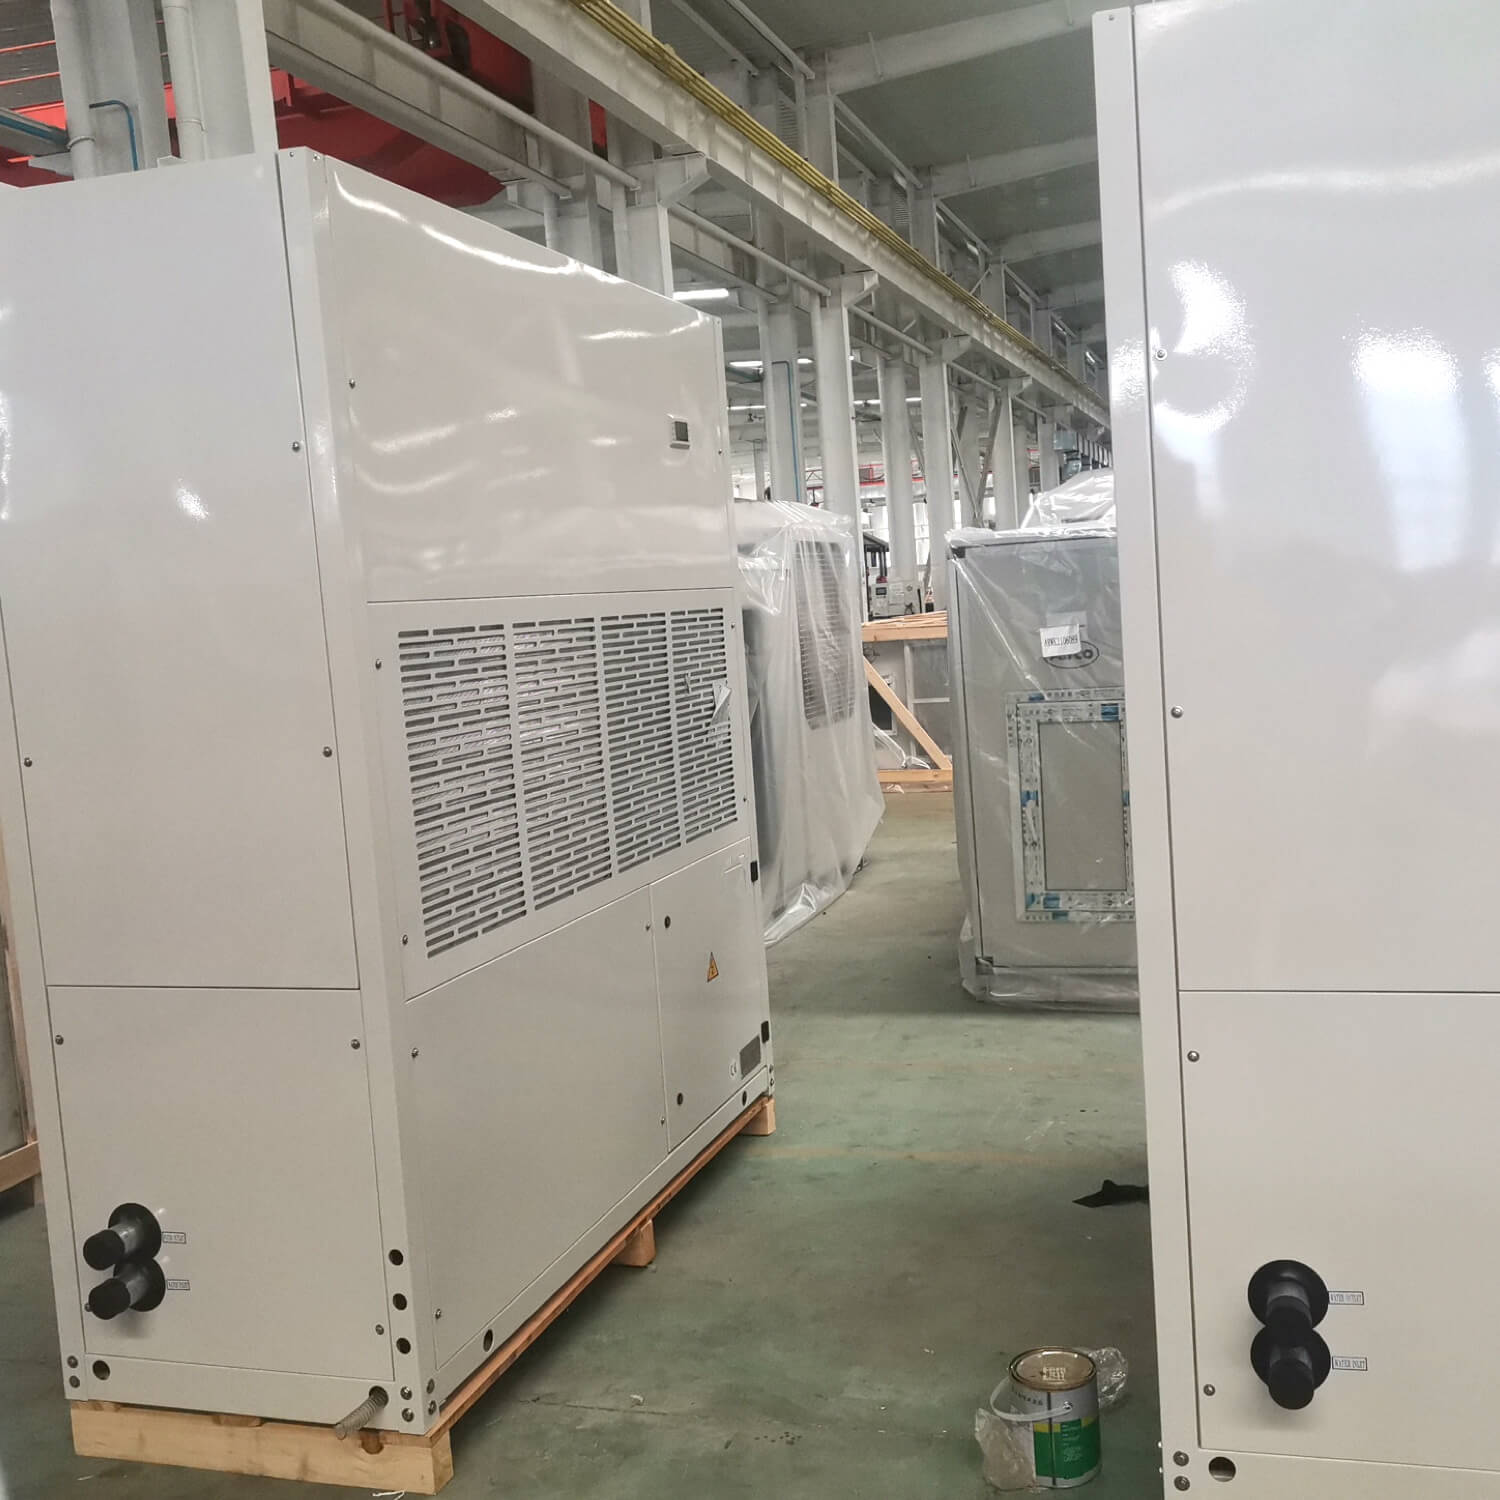 Cabinet type air conditioning unit